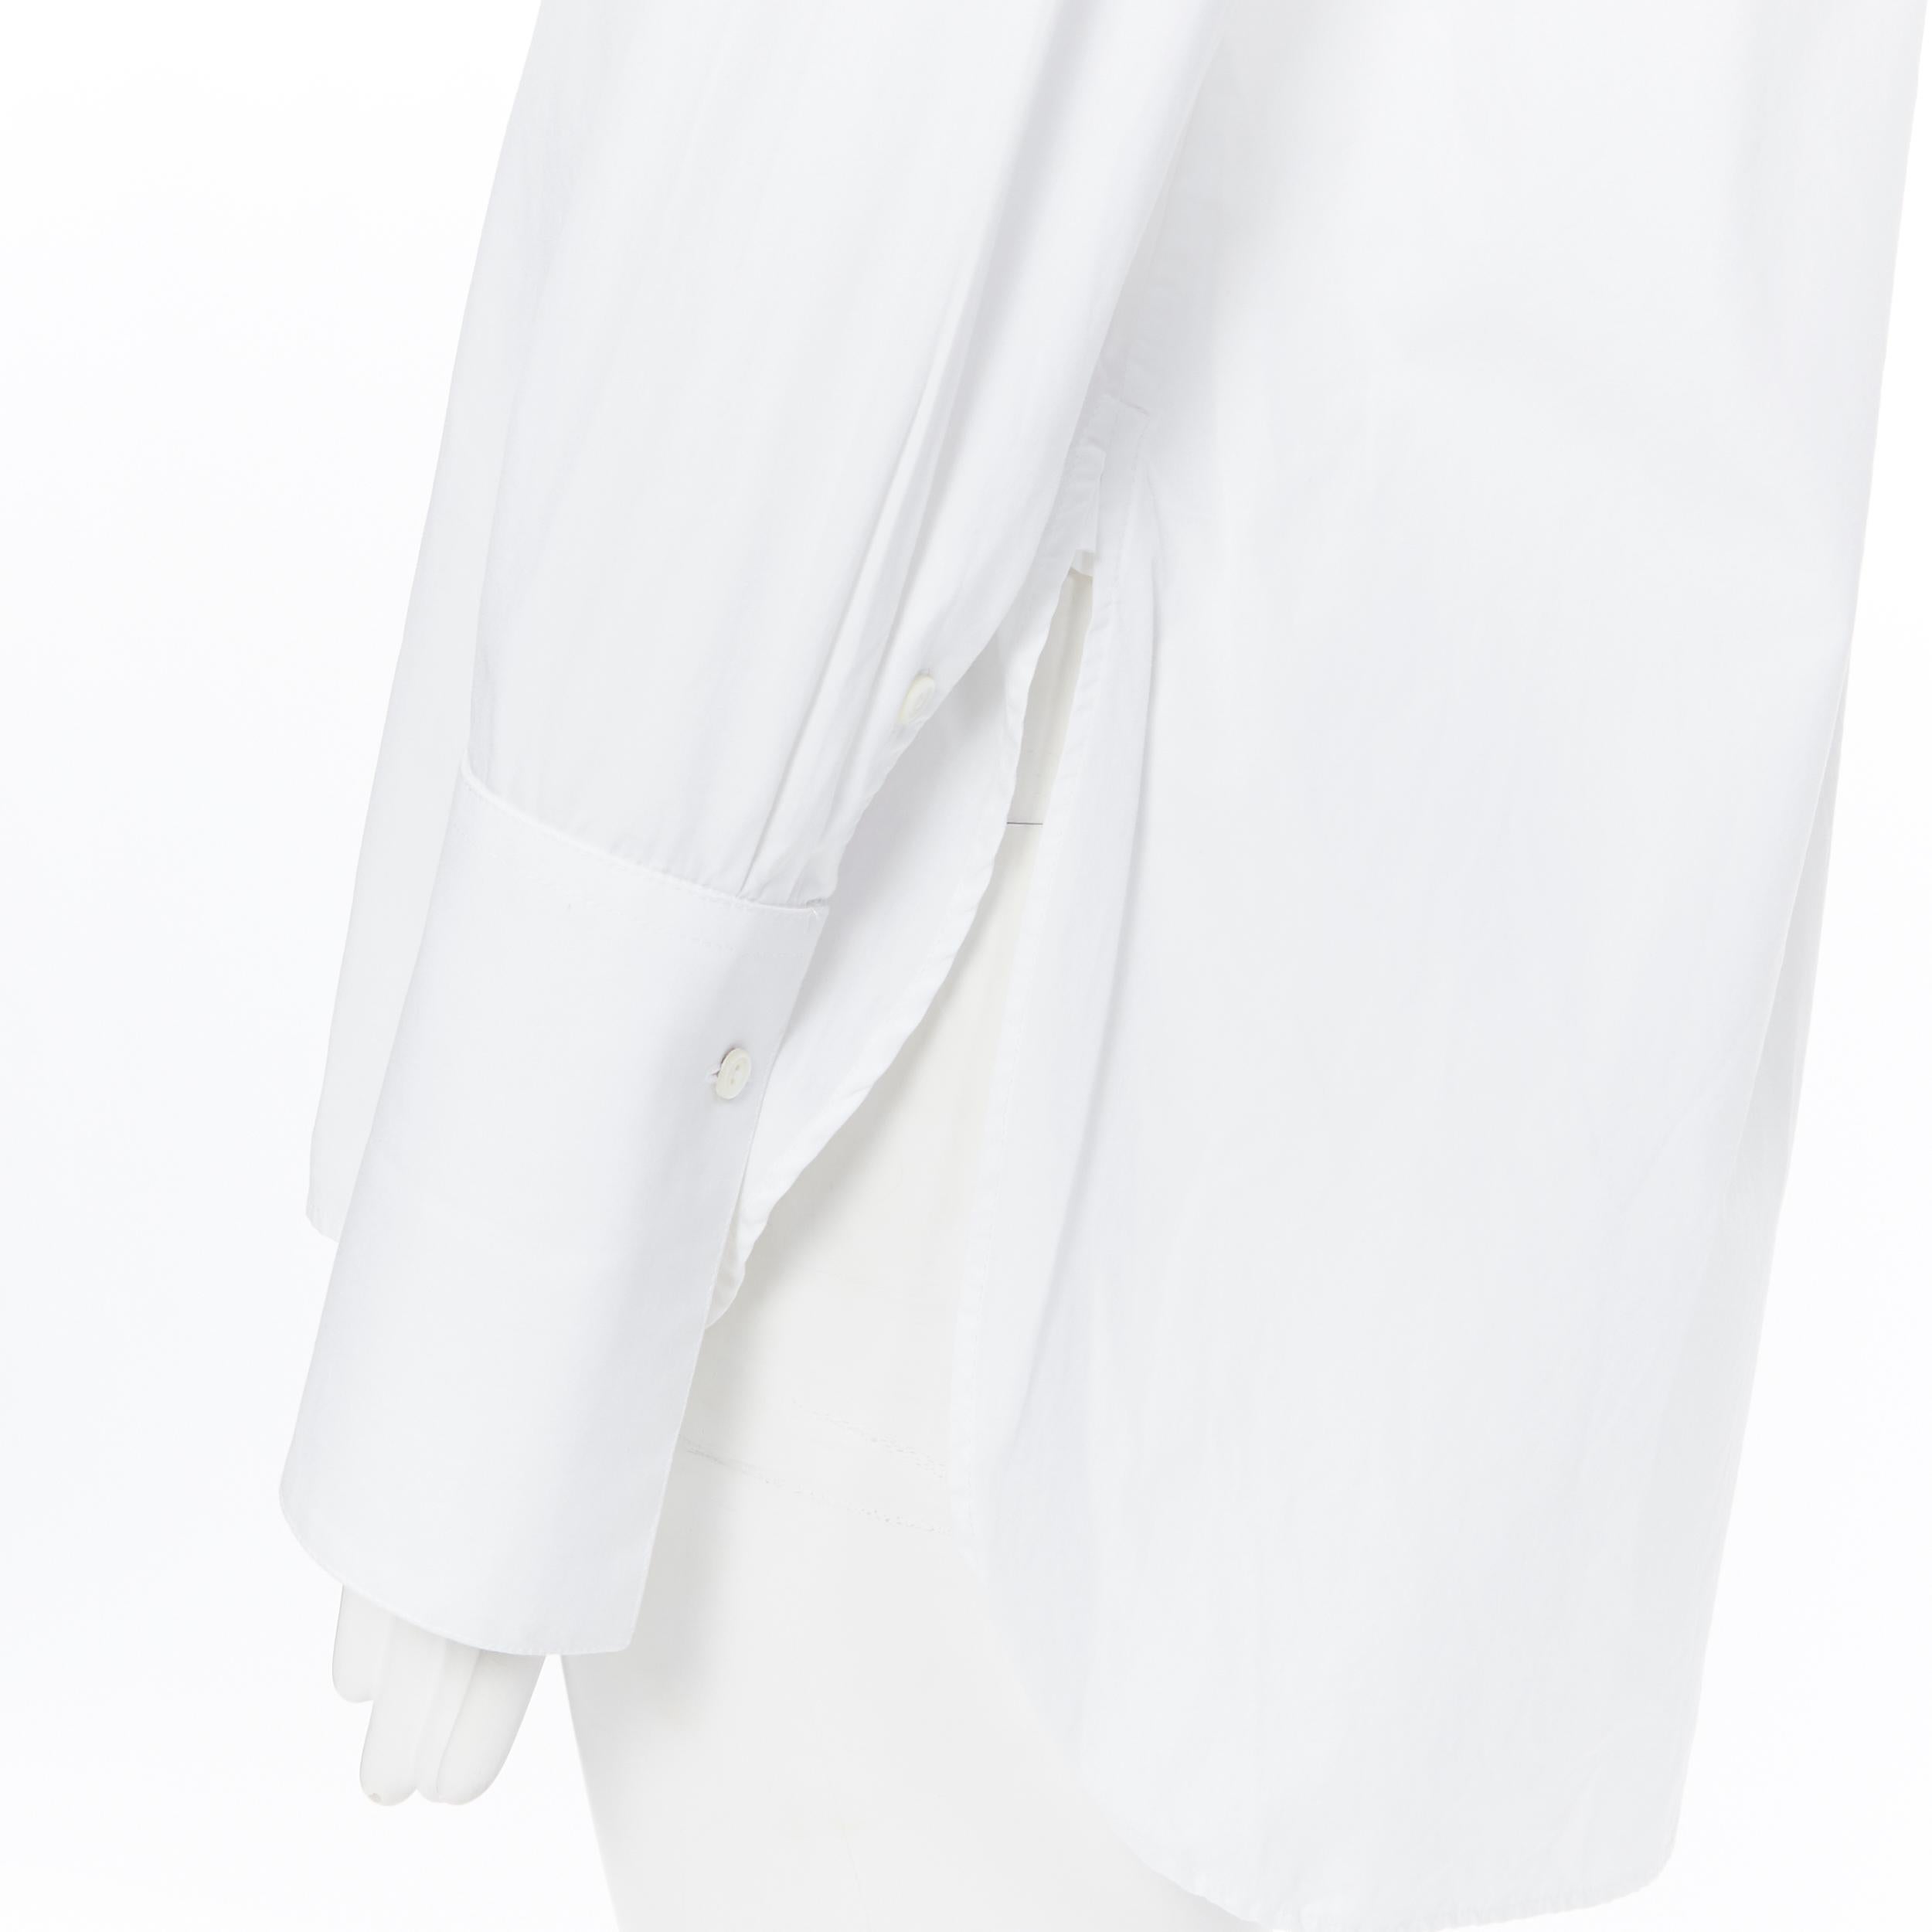 PALMER HARDING white cotton elongated cuff curvec hem oversized shirt UK8
Brand: Palmer Harding
Model Name / Style: Cotton shirt
Material: Cotton
Color: White
Pattern: Solid
Closure: Button
Extra Detail: Stiffen collar and cuff. Curved hem. Long